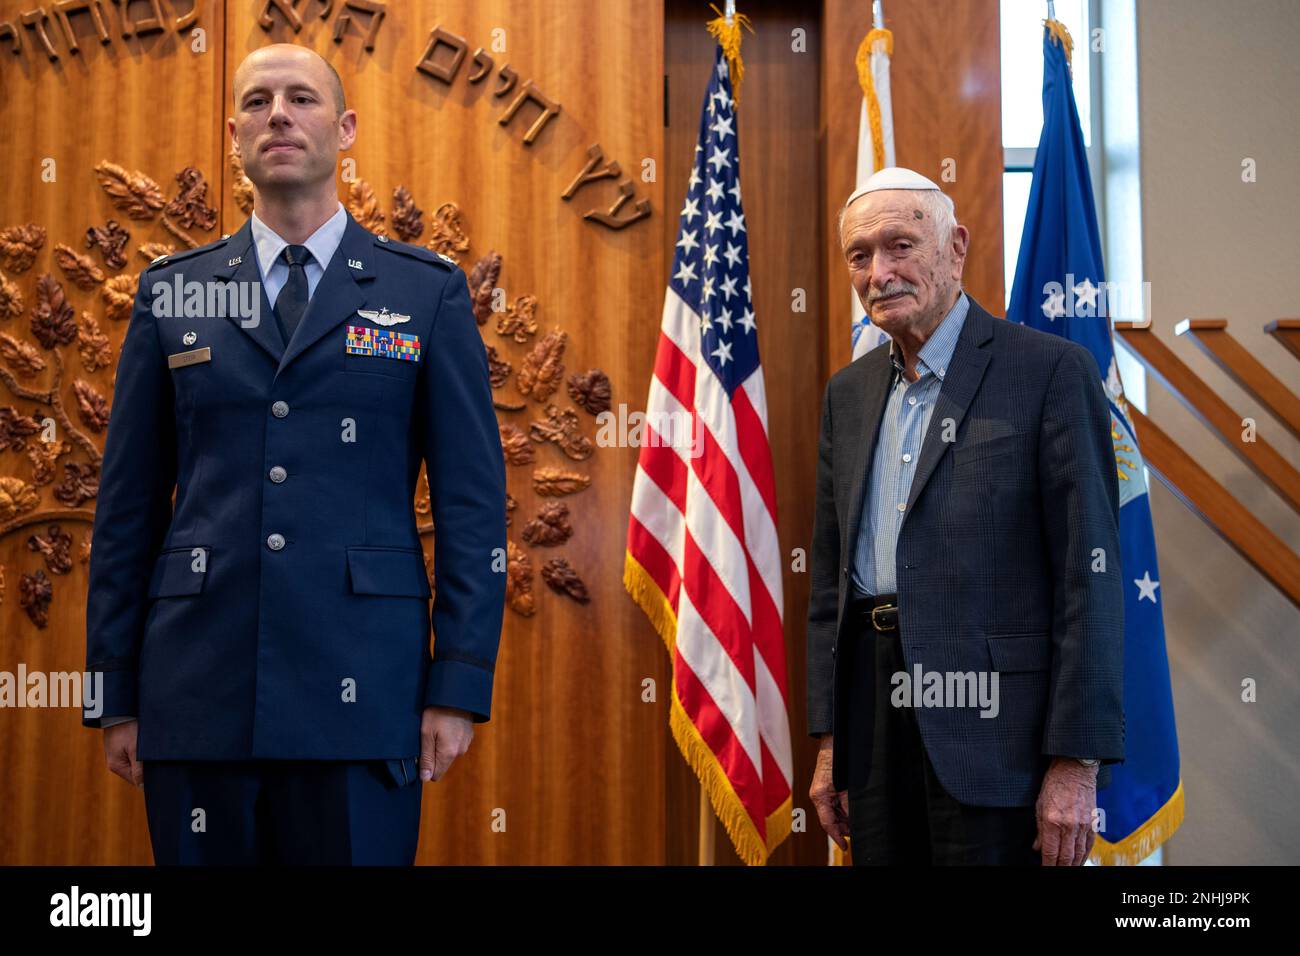 U.S. Air Force Lt. Col. Stein (left), 502nd Operations Support Squadron commander, prepares to present U.S. Army Air Corps 1st Lt. Gerald Teldon, retired, with the Air Medal for his honorable service as a pilot on July 29, 2022, at the Chabad Center for Jewish Life and Learning, San Antonio, Texas. Teldon, born in Bronx, N.Y., in 1924, joined the military in 1944. He completed 62 missions during WWII and the Korean War. Lt. Col. Andrew Stein, 502nd Operations Support Squadron commander, was the presiding officers. The awards presented to Teldon are as follows: the Air Medal; American Campaign Stock Photo